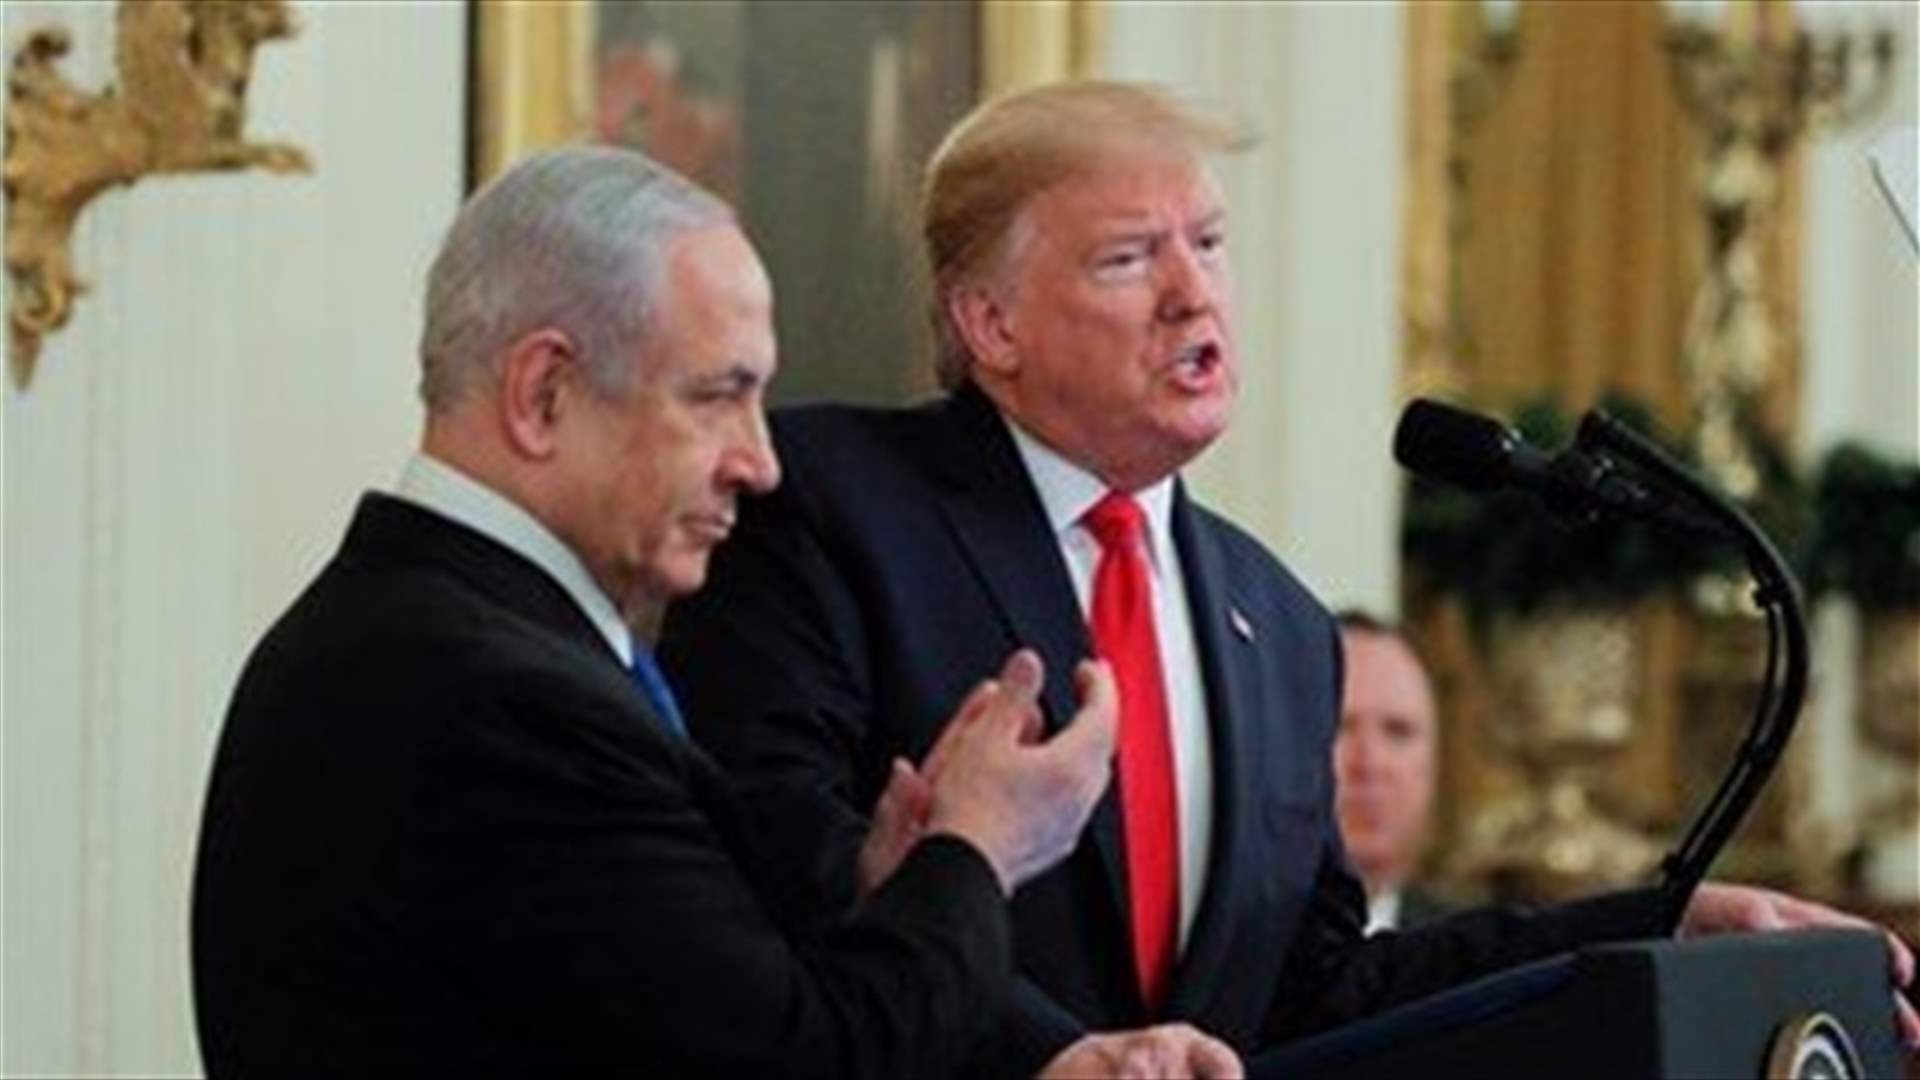 Trump proposes Palestinian state with capital in eastern Jerusalem